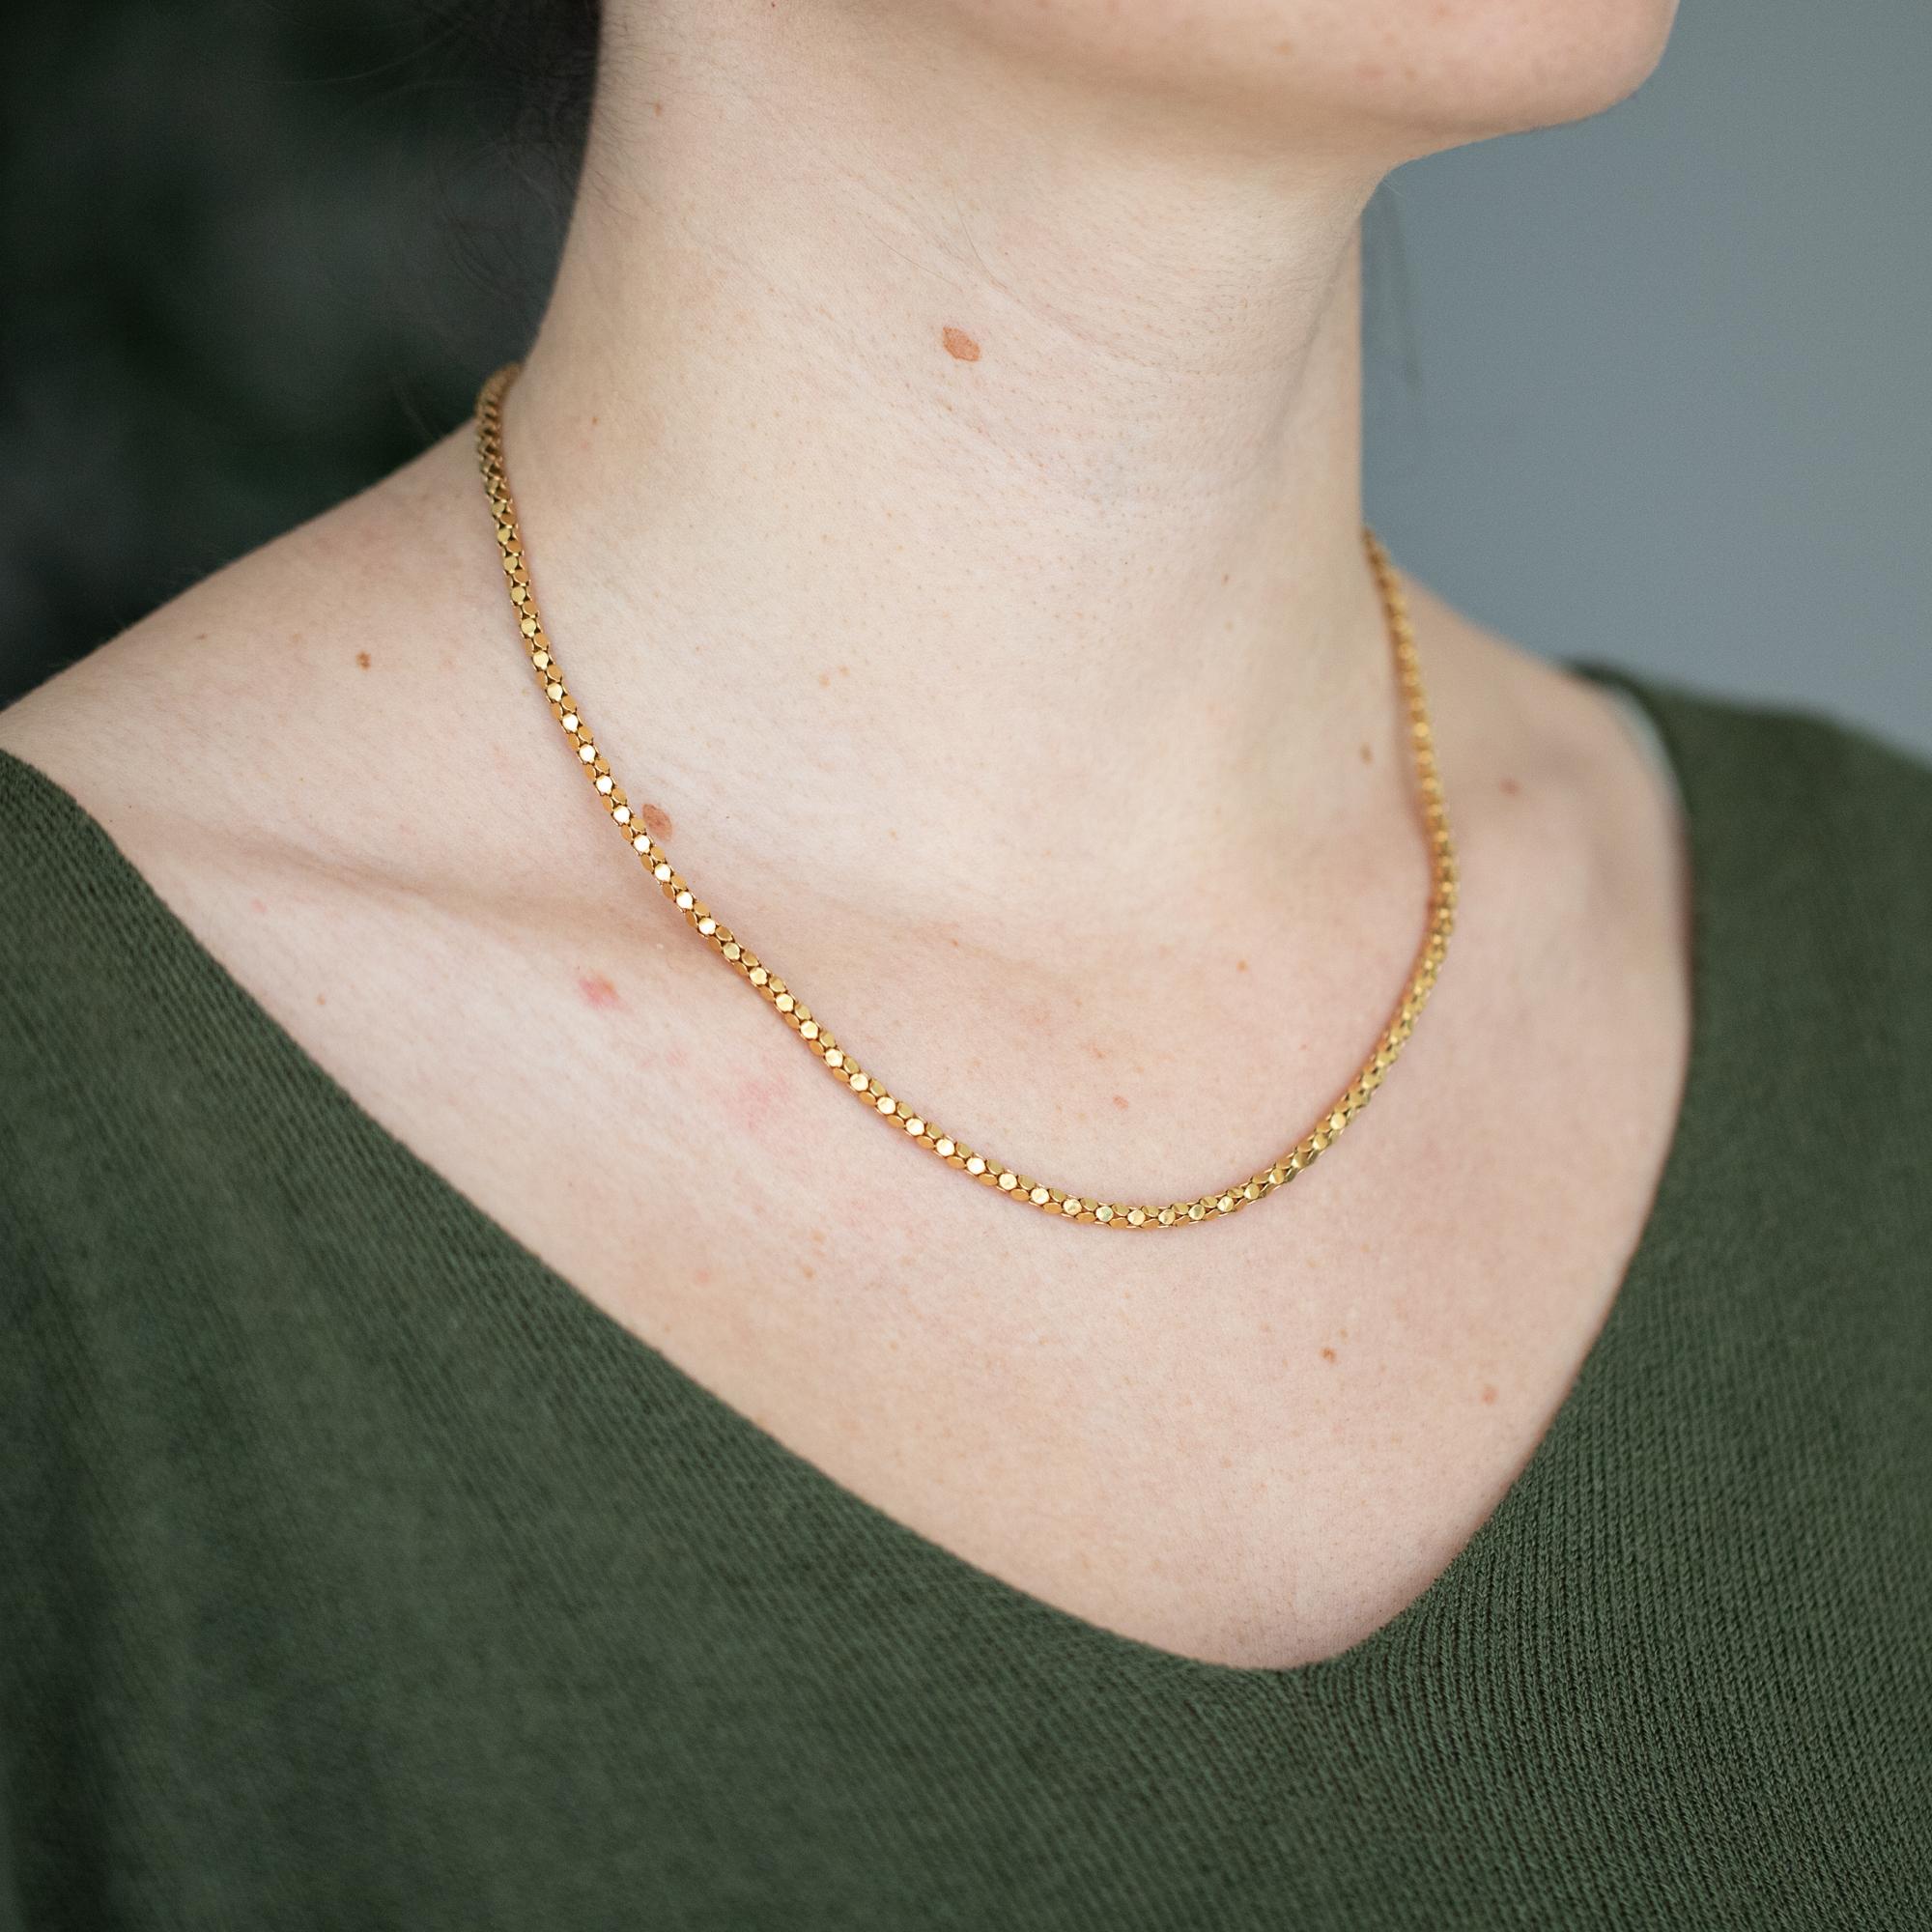 For sale is this 18 k gold retro necklace. This Necklace necklace checks of all the characteristics of the typical retro jewelry, no or a small number of gemstones (because these were more difficult to obtain during and in the beginning after the